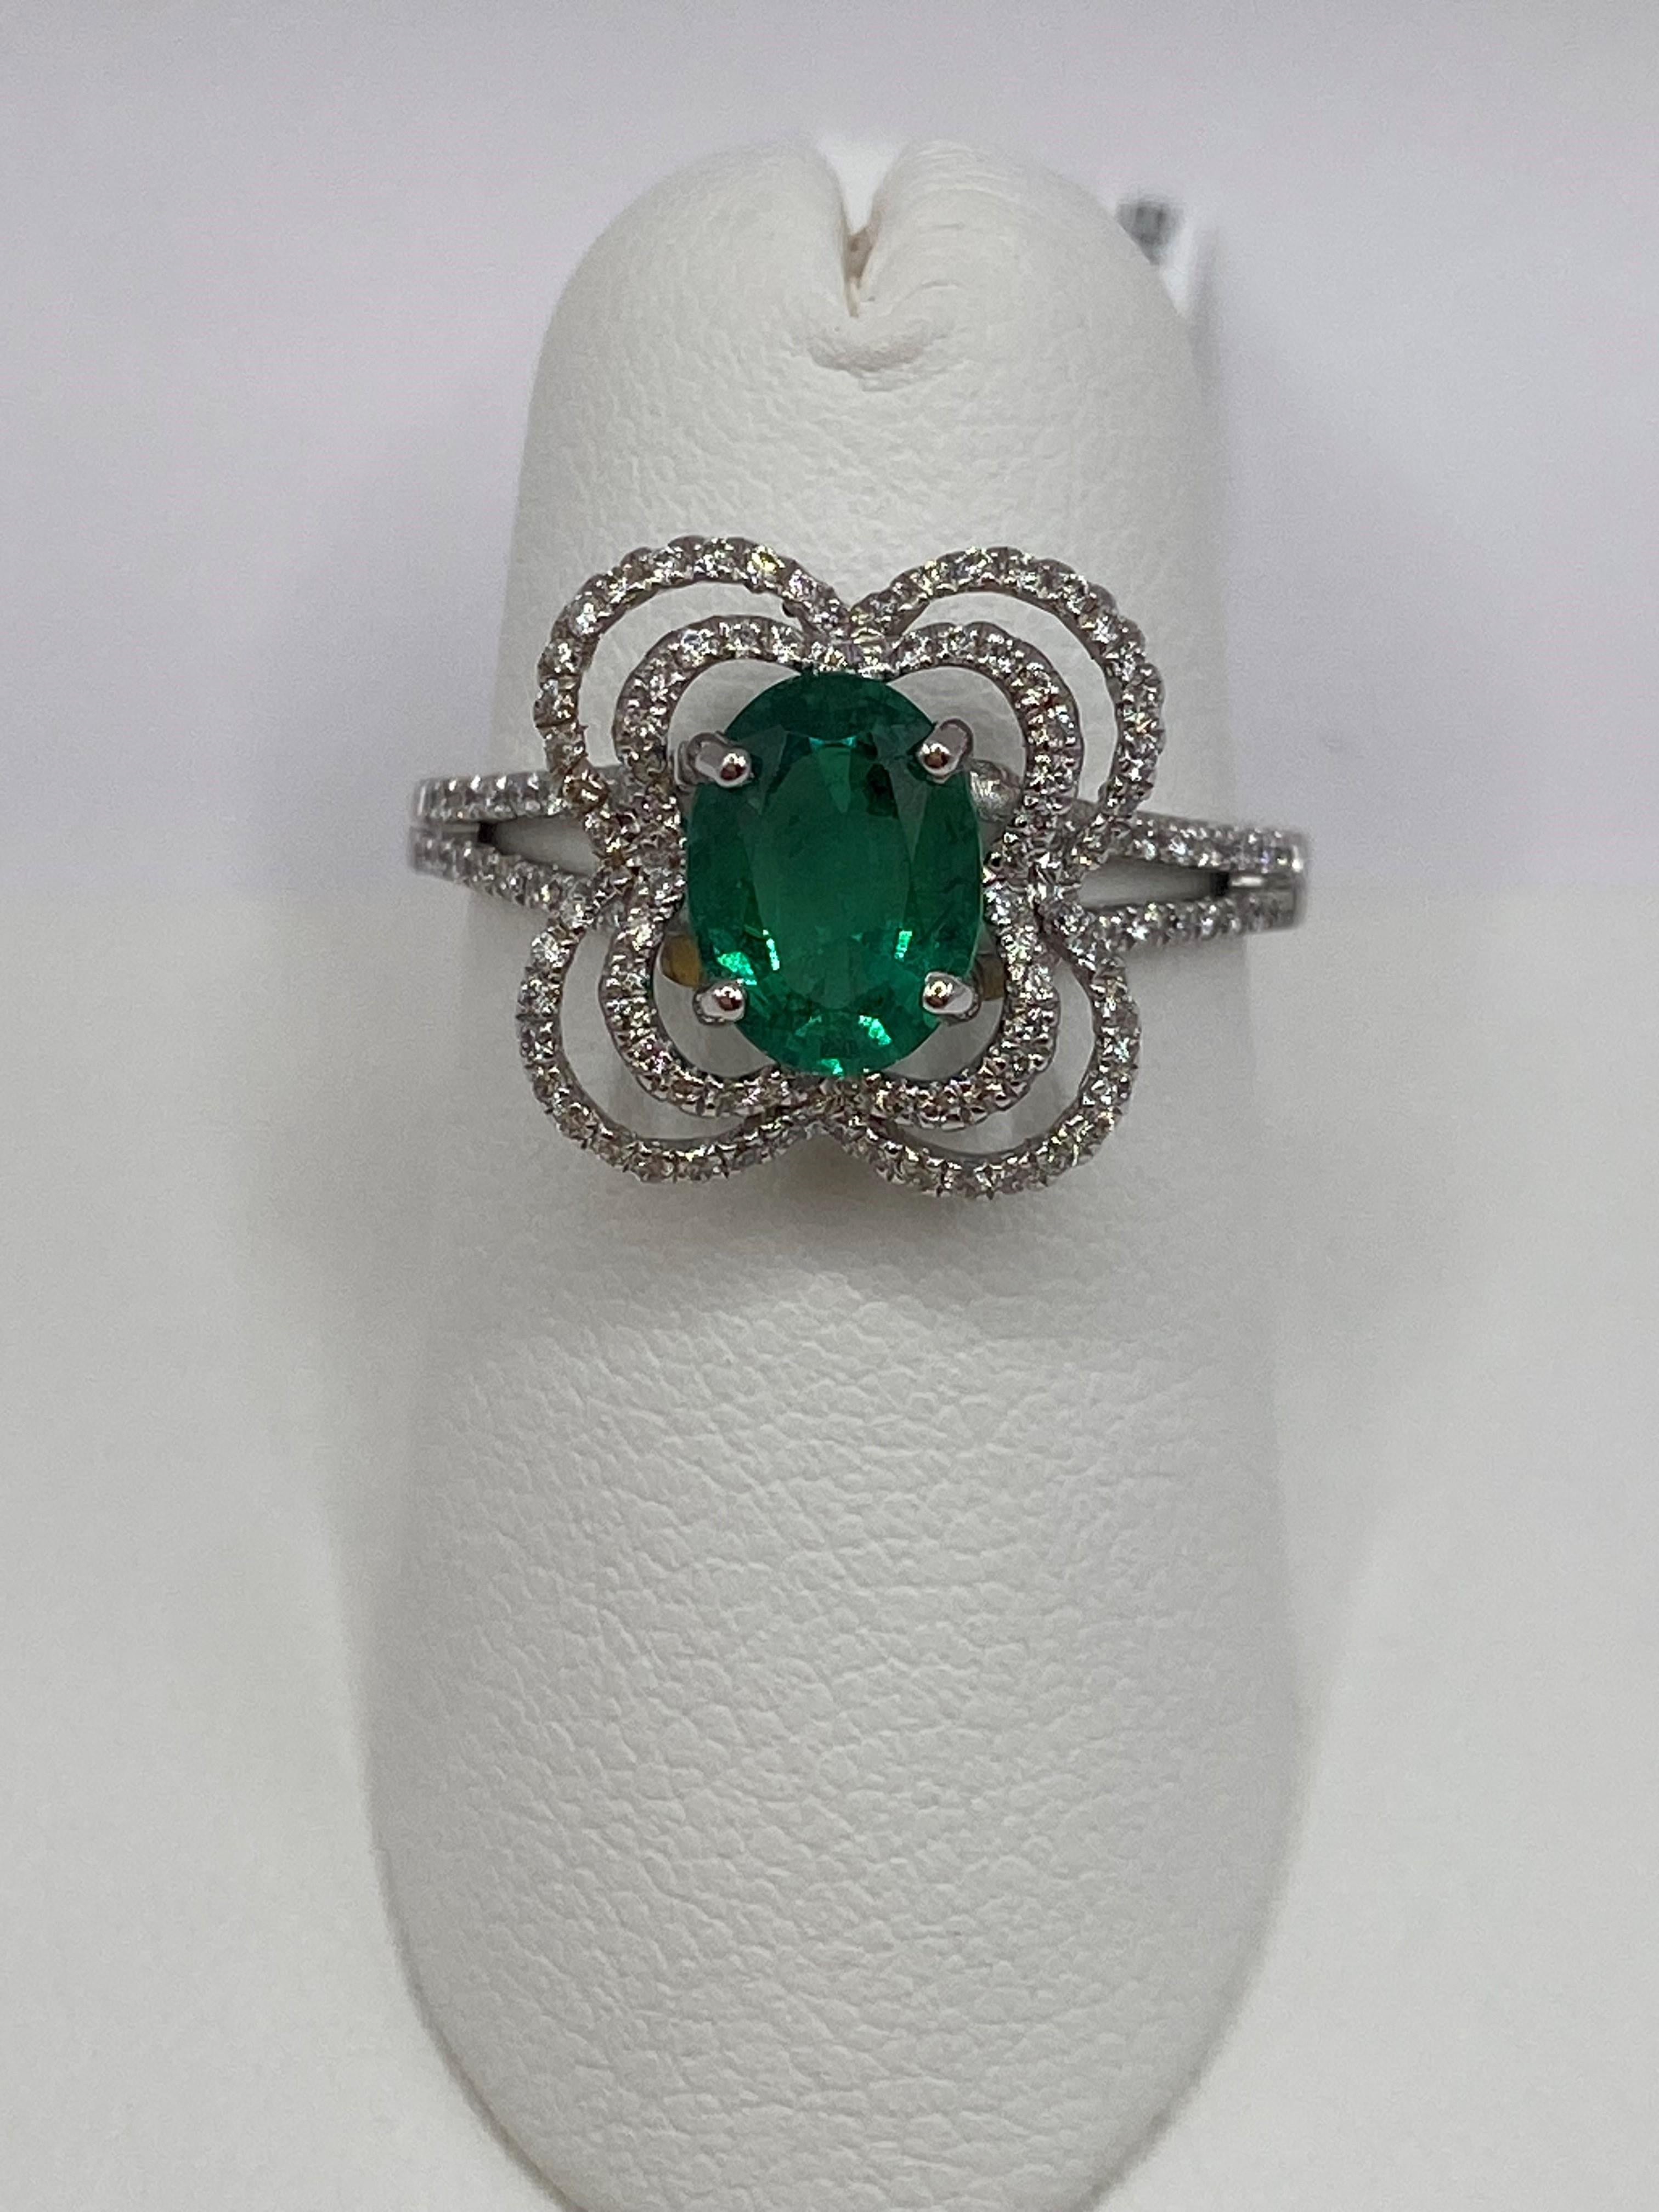 18KT White Gold
Ring Size: 6.5
(ring is a size 6.5, but is sizable upon request)

Number of Oval Cut Emeralds: 1
Carat Weight: 1.02ct
Stone Size: 8 x 6mm

Number of Round Diamonds: 124
Carat Weight: 0.35ctw